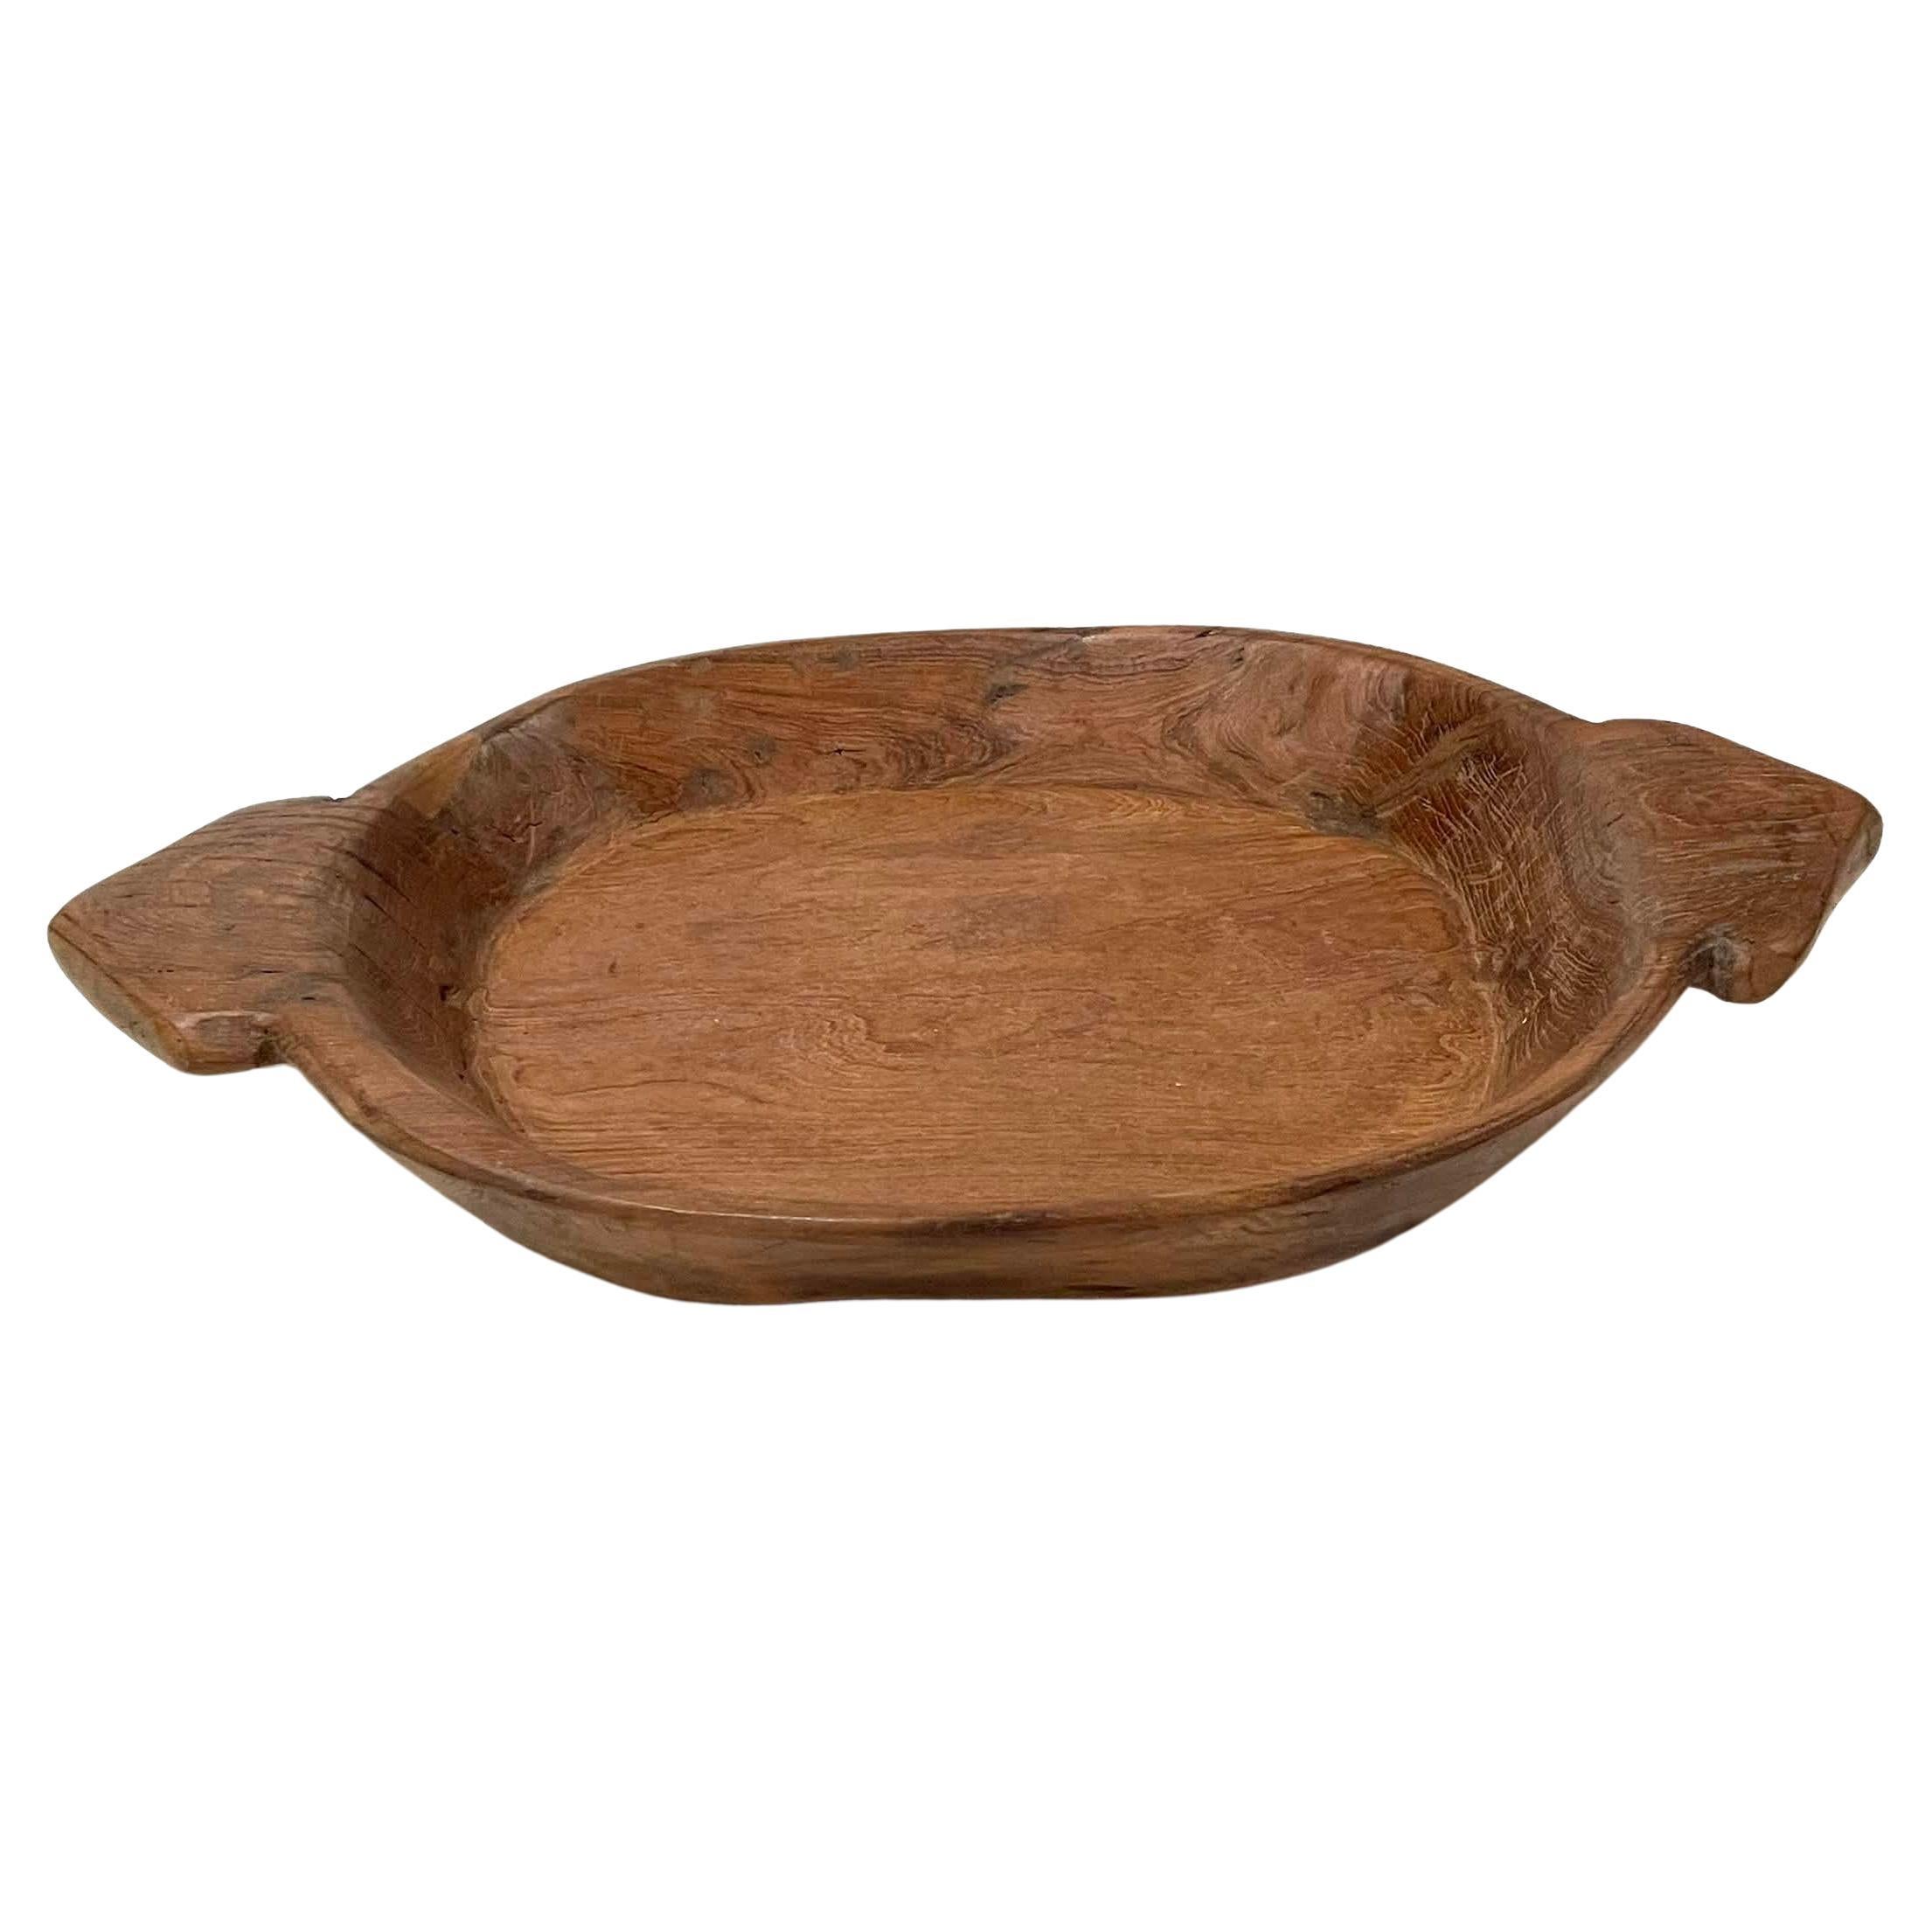 Wooden Food Vessel Bowl, India, 19th Century